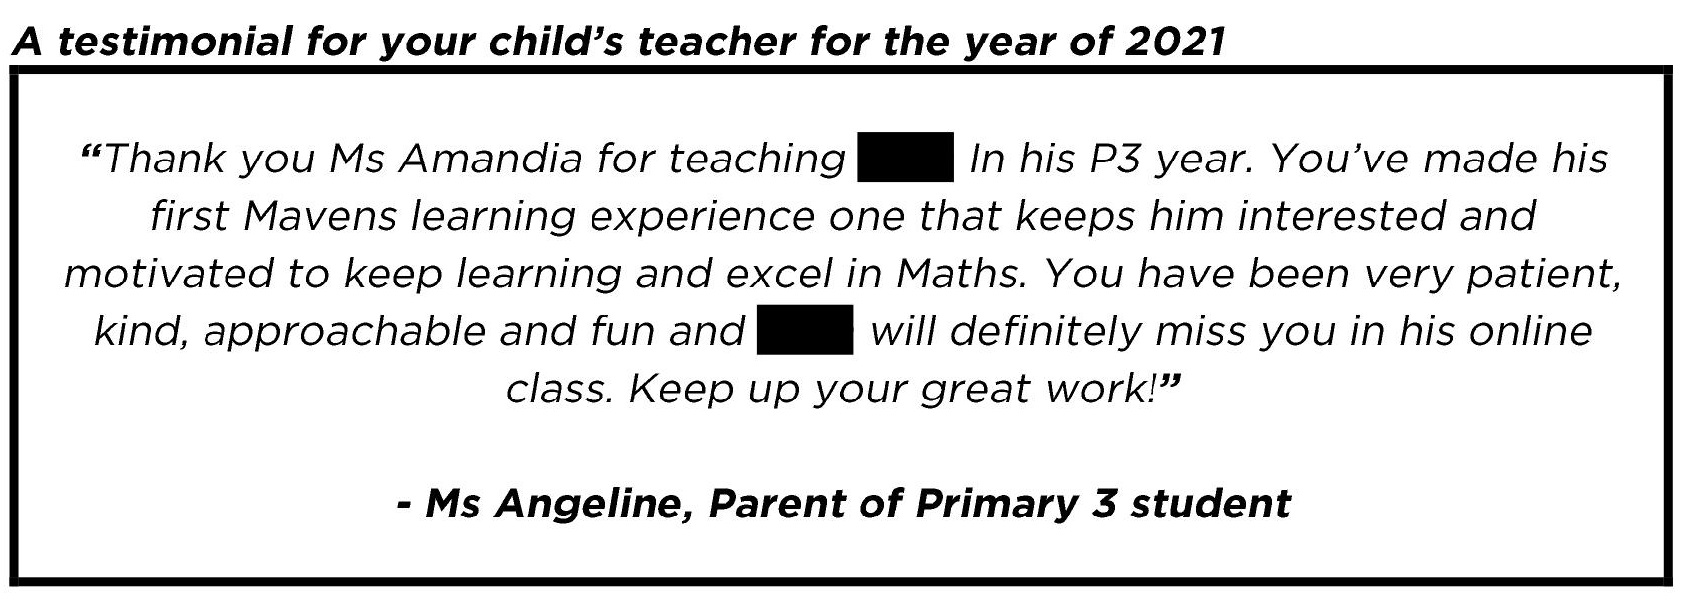 "...keeps him interested and motivated to keep learning and excel in Maths."